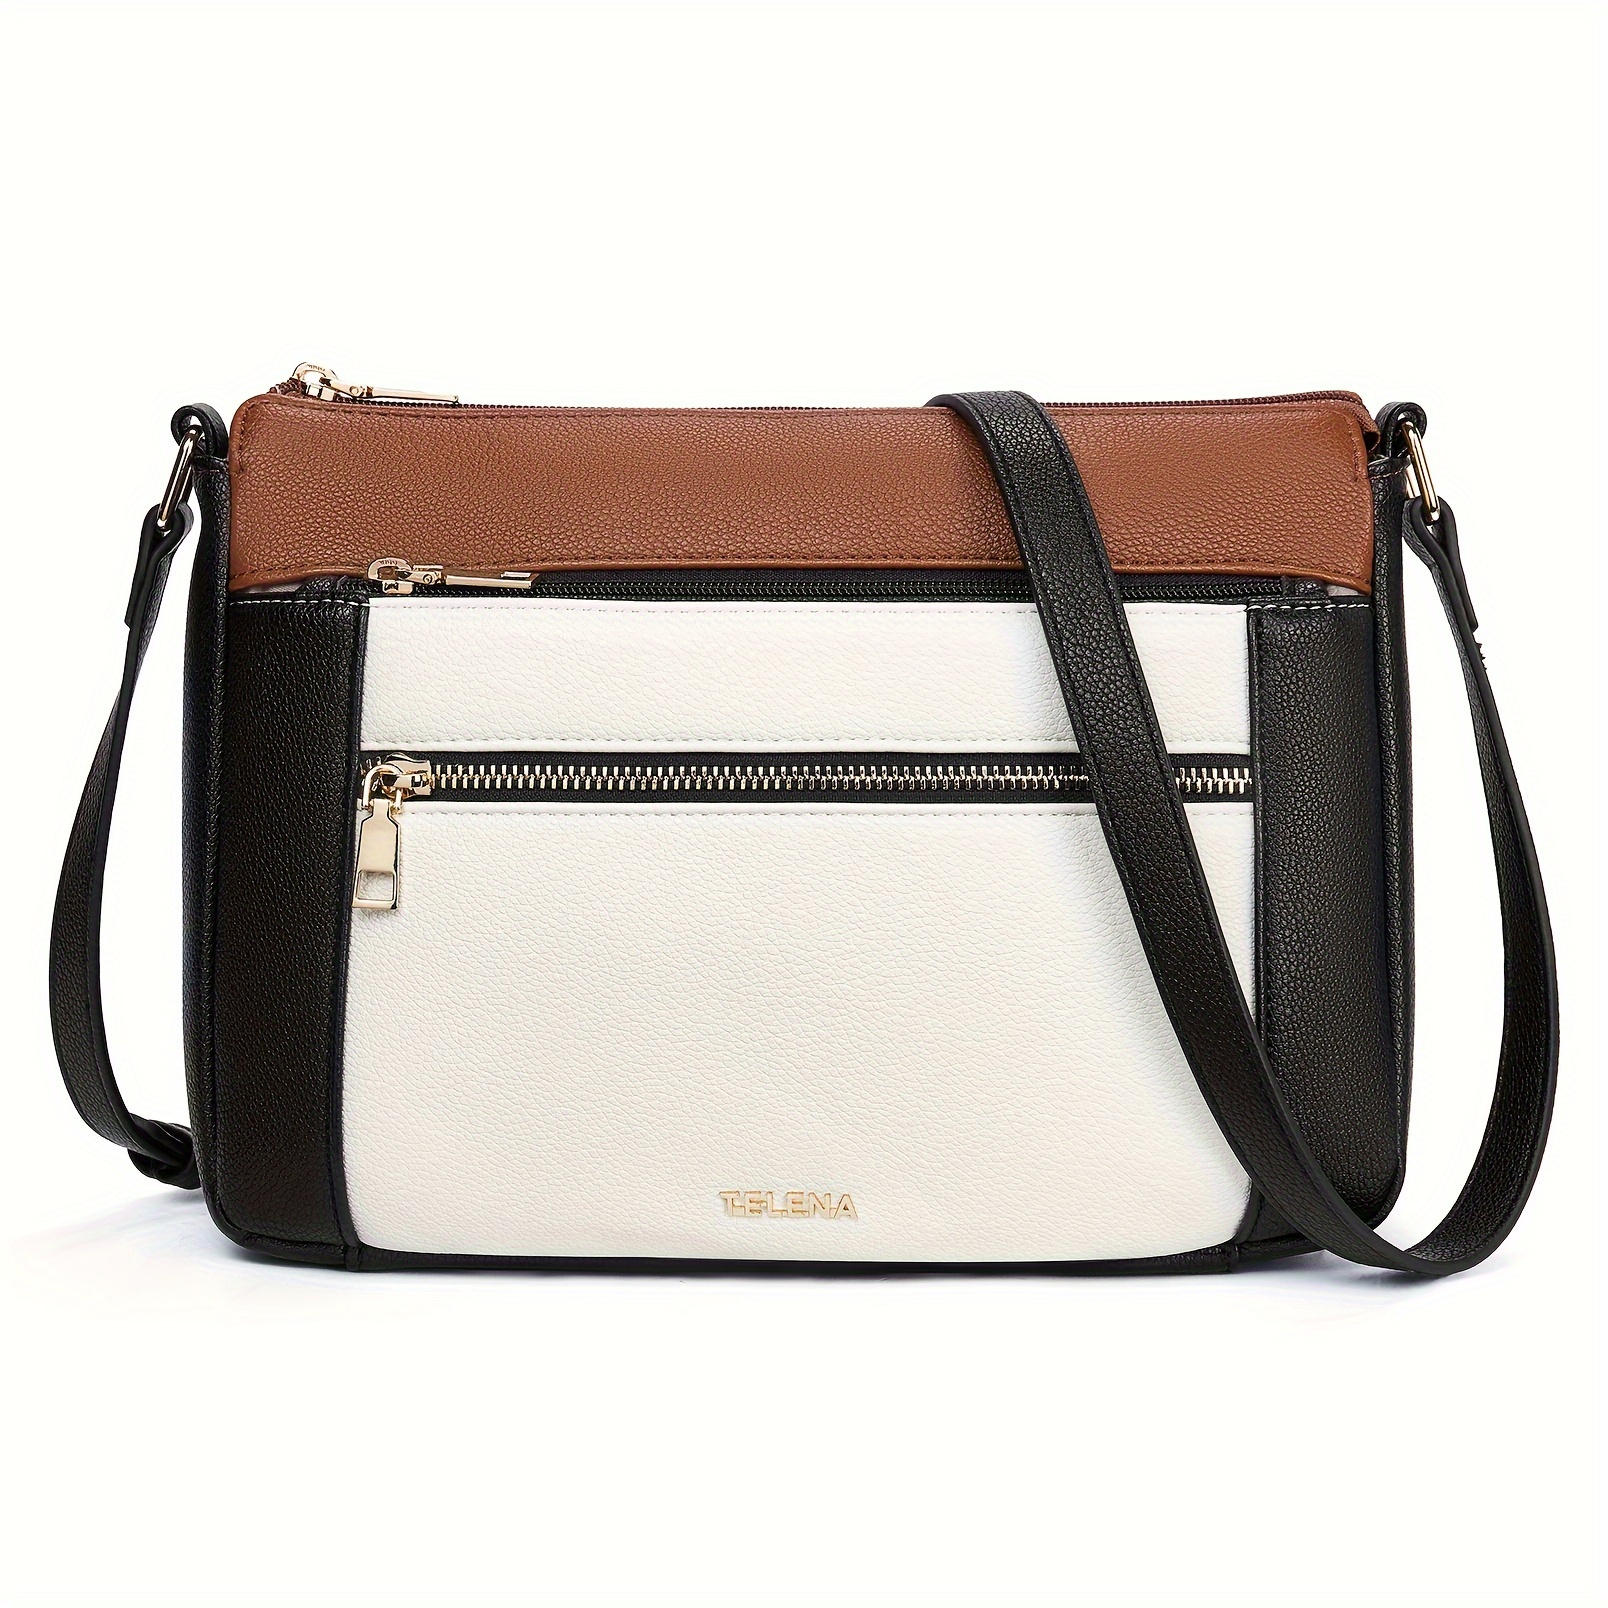 

Crossbody Bags For Women, Vegan Leather Shoulder Purse, Square Camera Bag With Adjustable Strap